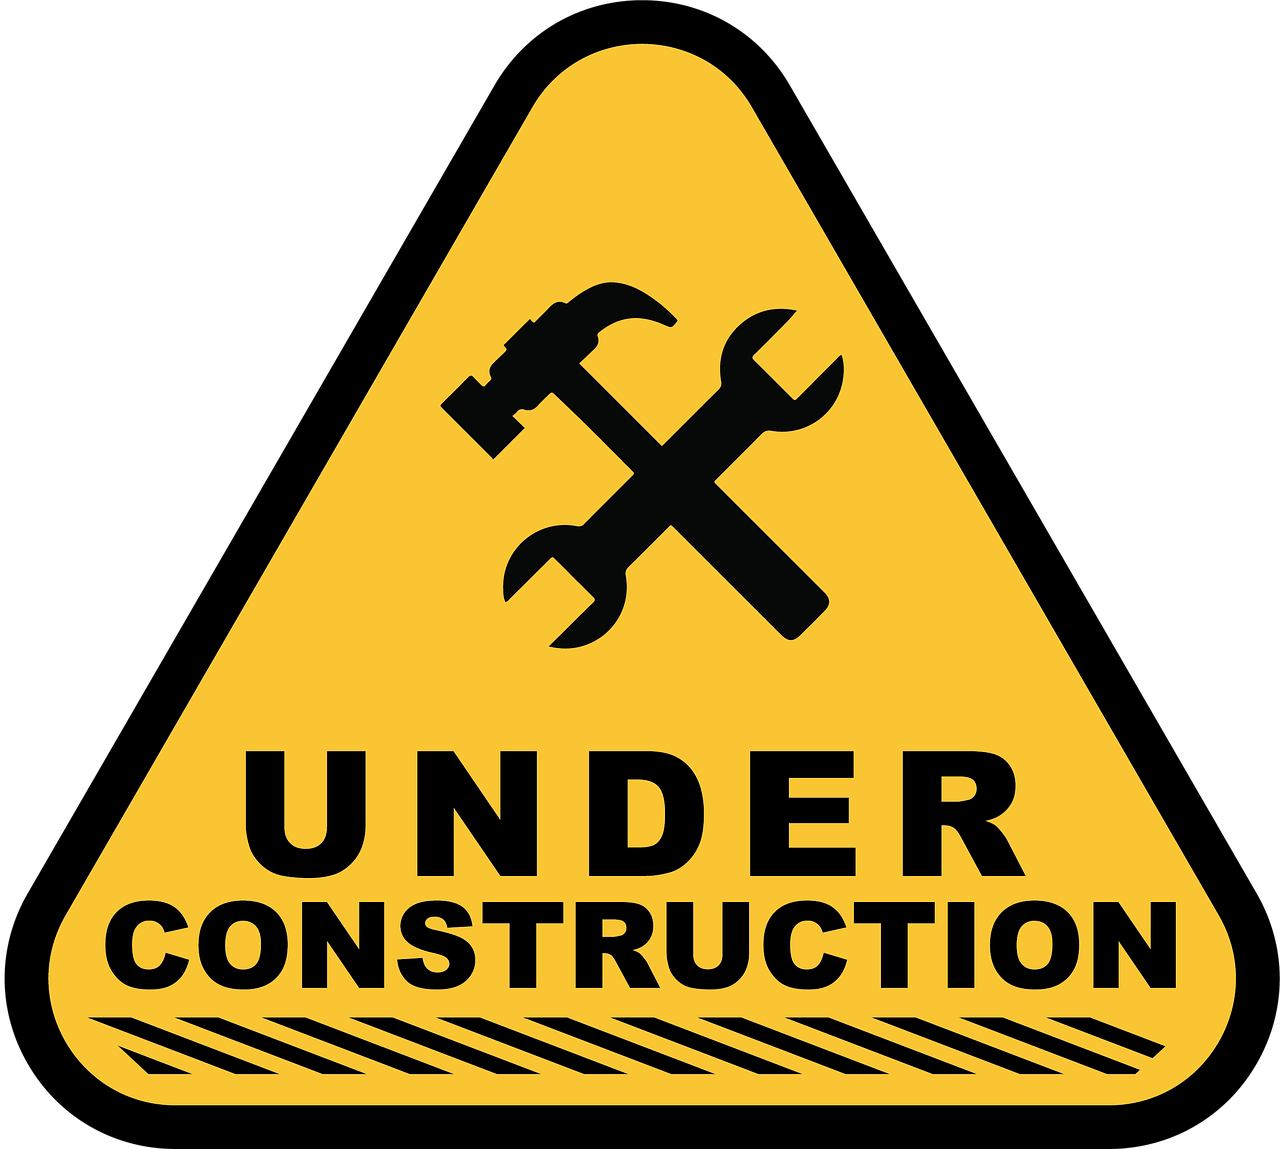 under construction construction sign free photo